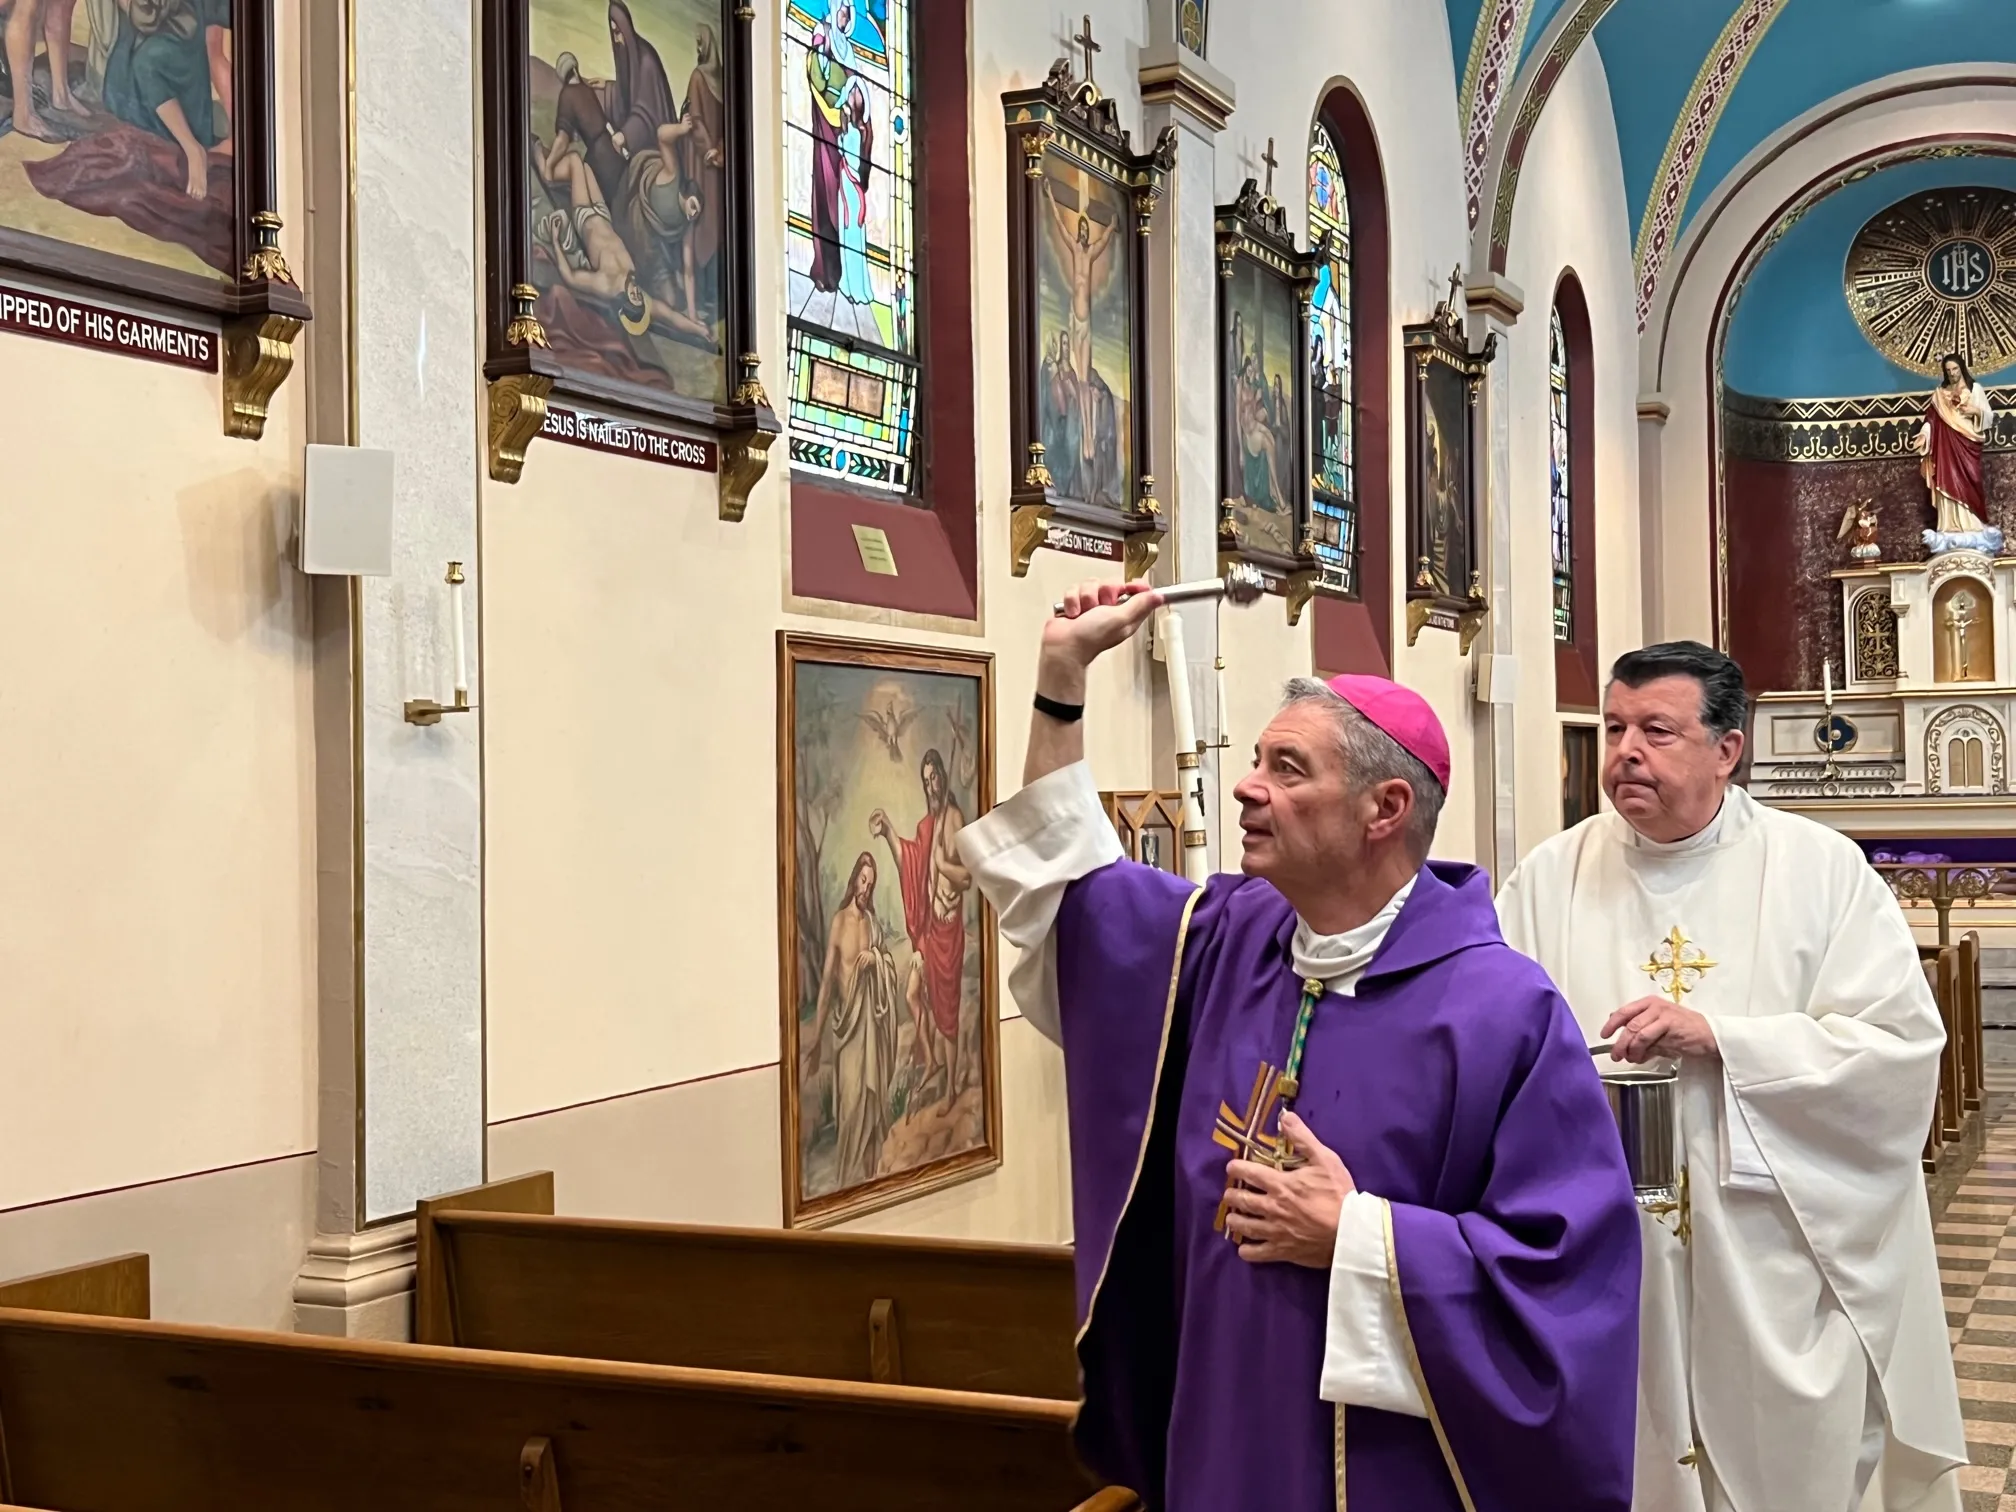 Bishop Robert Brennan blesses Annunciation of the Blessed Virgin Mary Church in Brooklyn, New York, with holy water on Nov. 4, 2023, in response to the filming of an indecent music video in the church. Assisting the bishop is Monsignor Joseph Grimaldi, vicar general of the Diocese of Brooklyn.?w=200&h=150